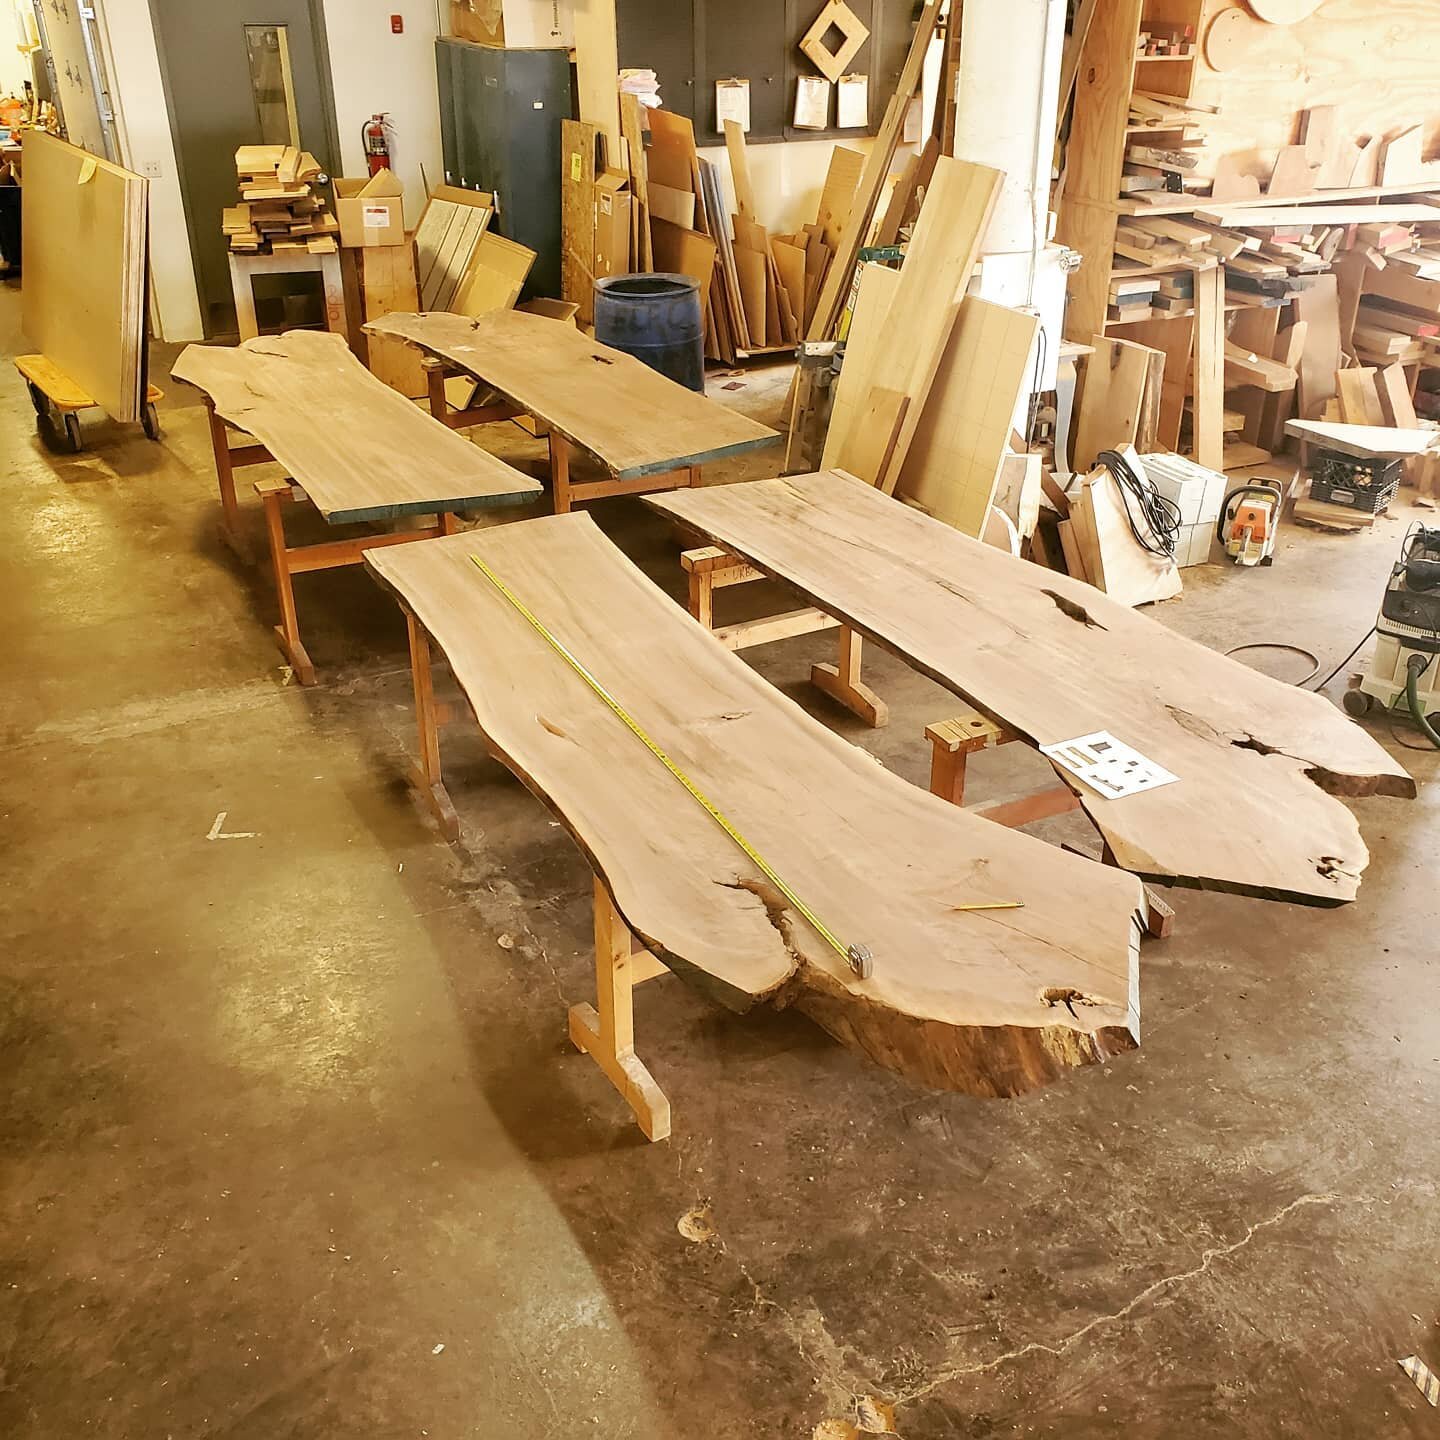 Laying out a large walnut table. This ones going to be roughly 4' x 16' when worked together.